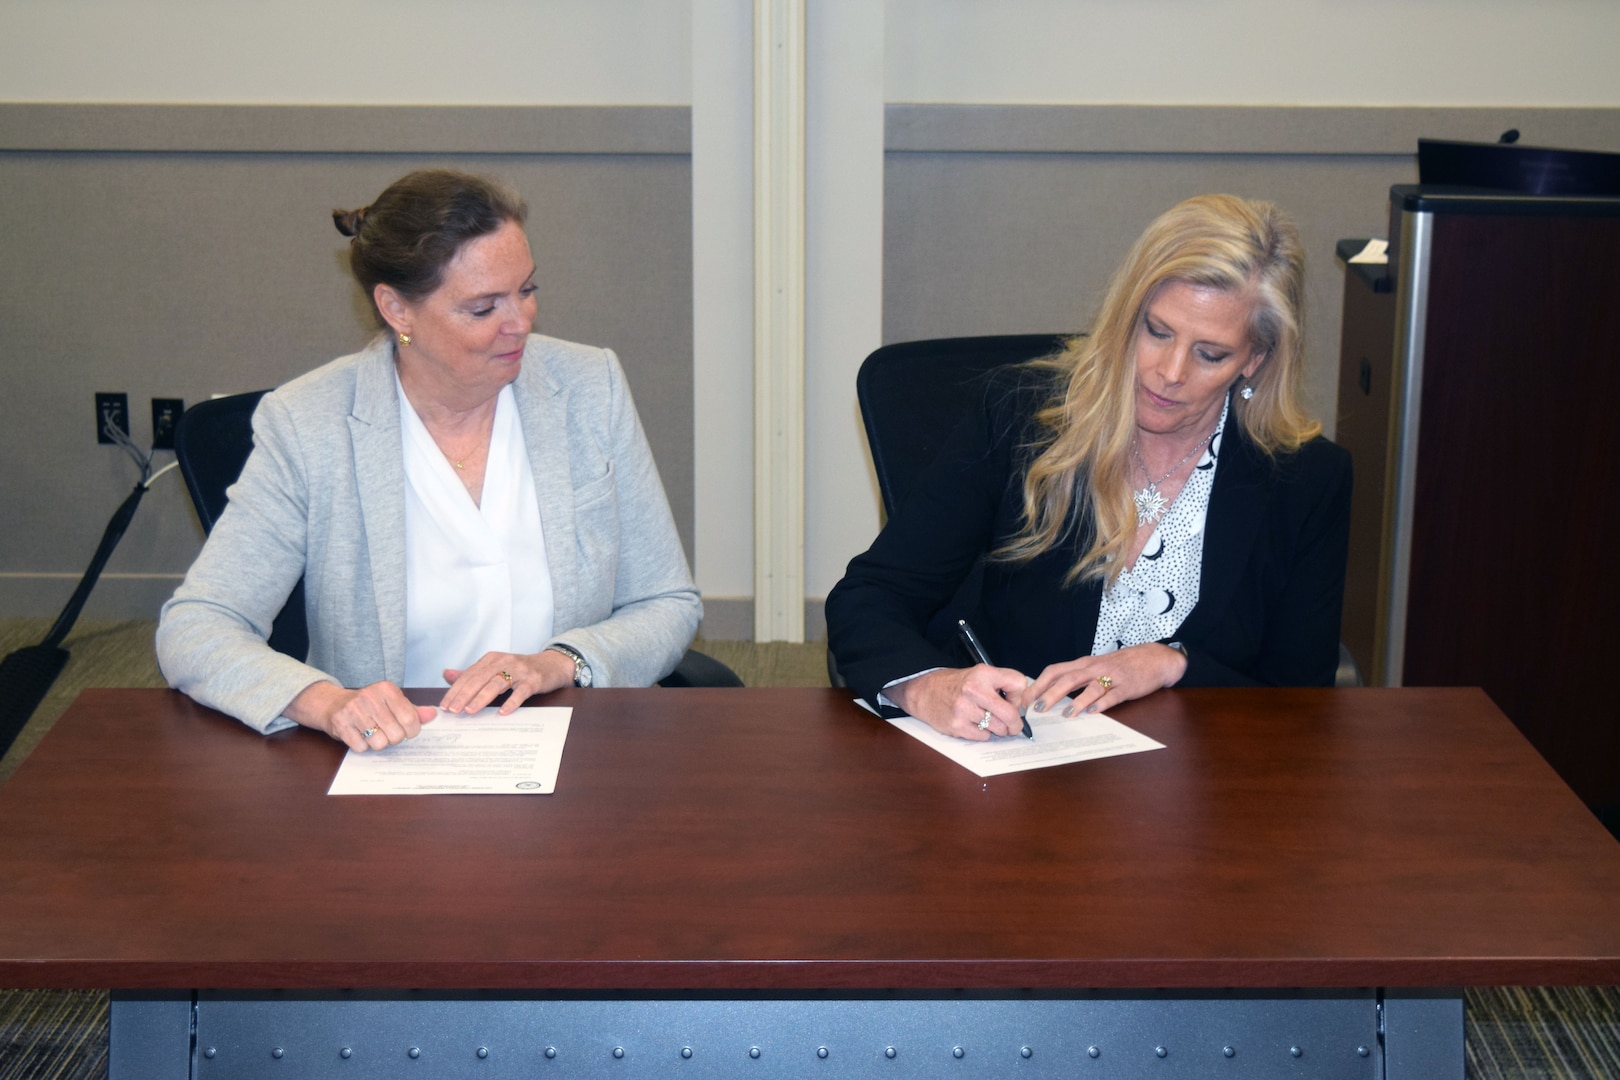 Two women sitting at a desk signing documents.